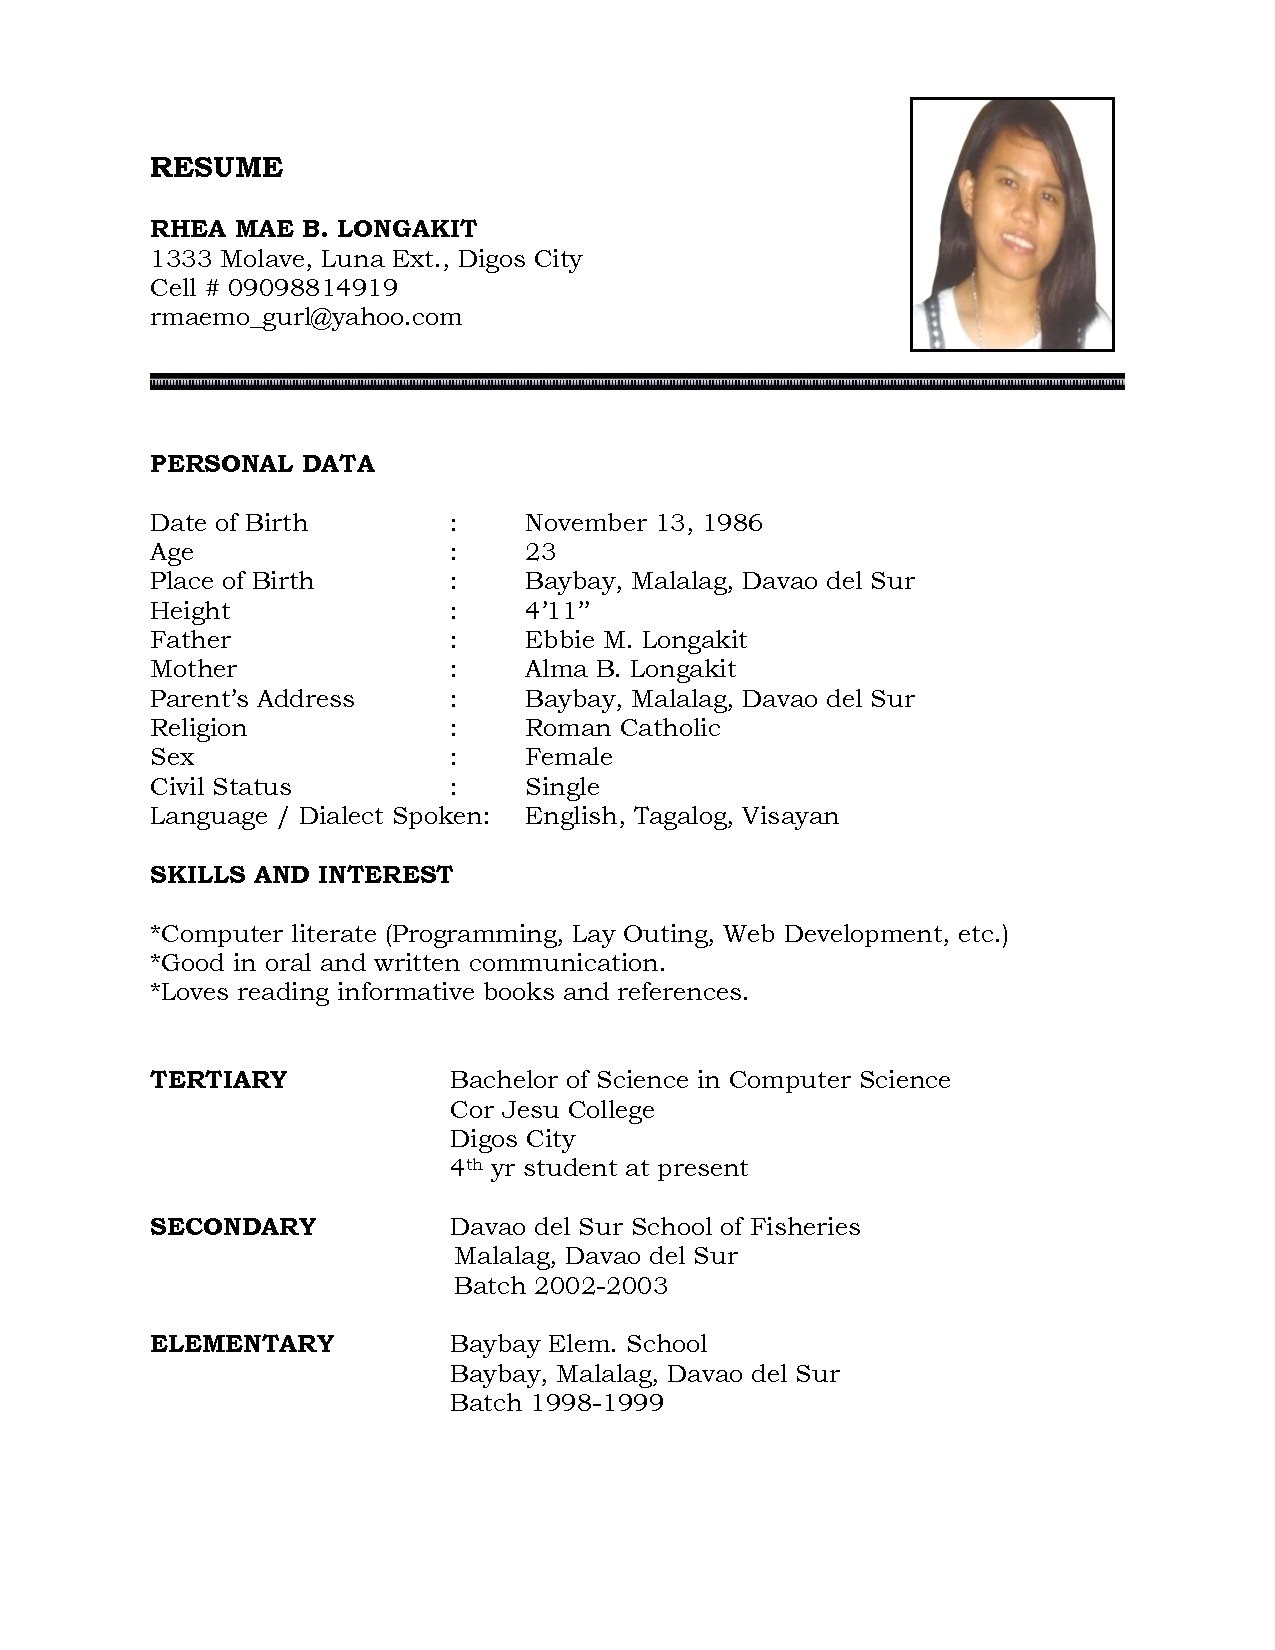 Sample Of Resume for Working Student Resume Sample format for Working Students Listmachinepro Com